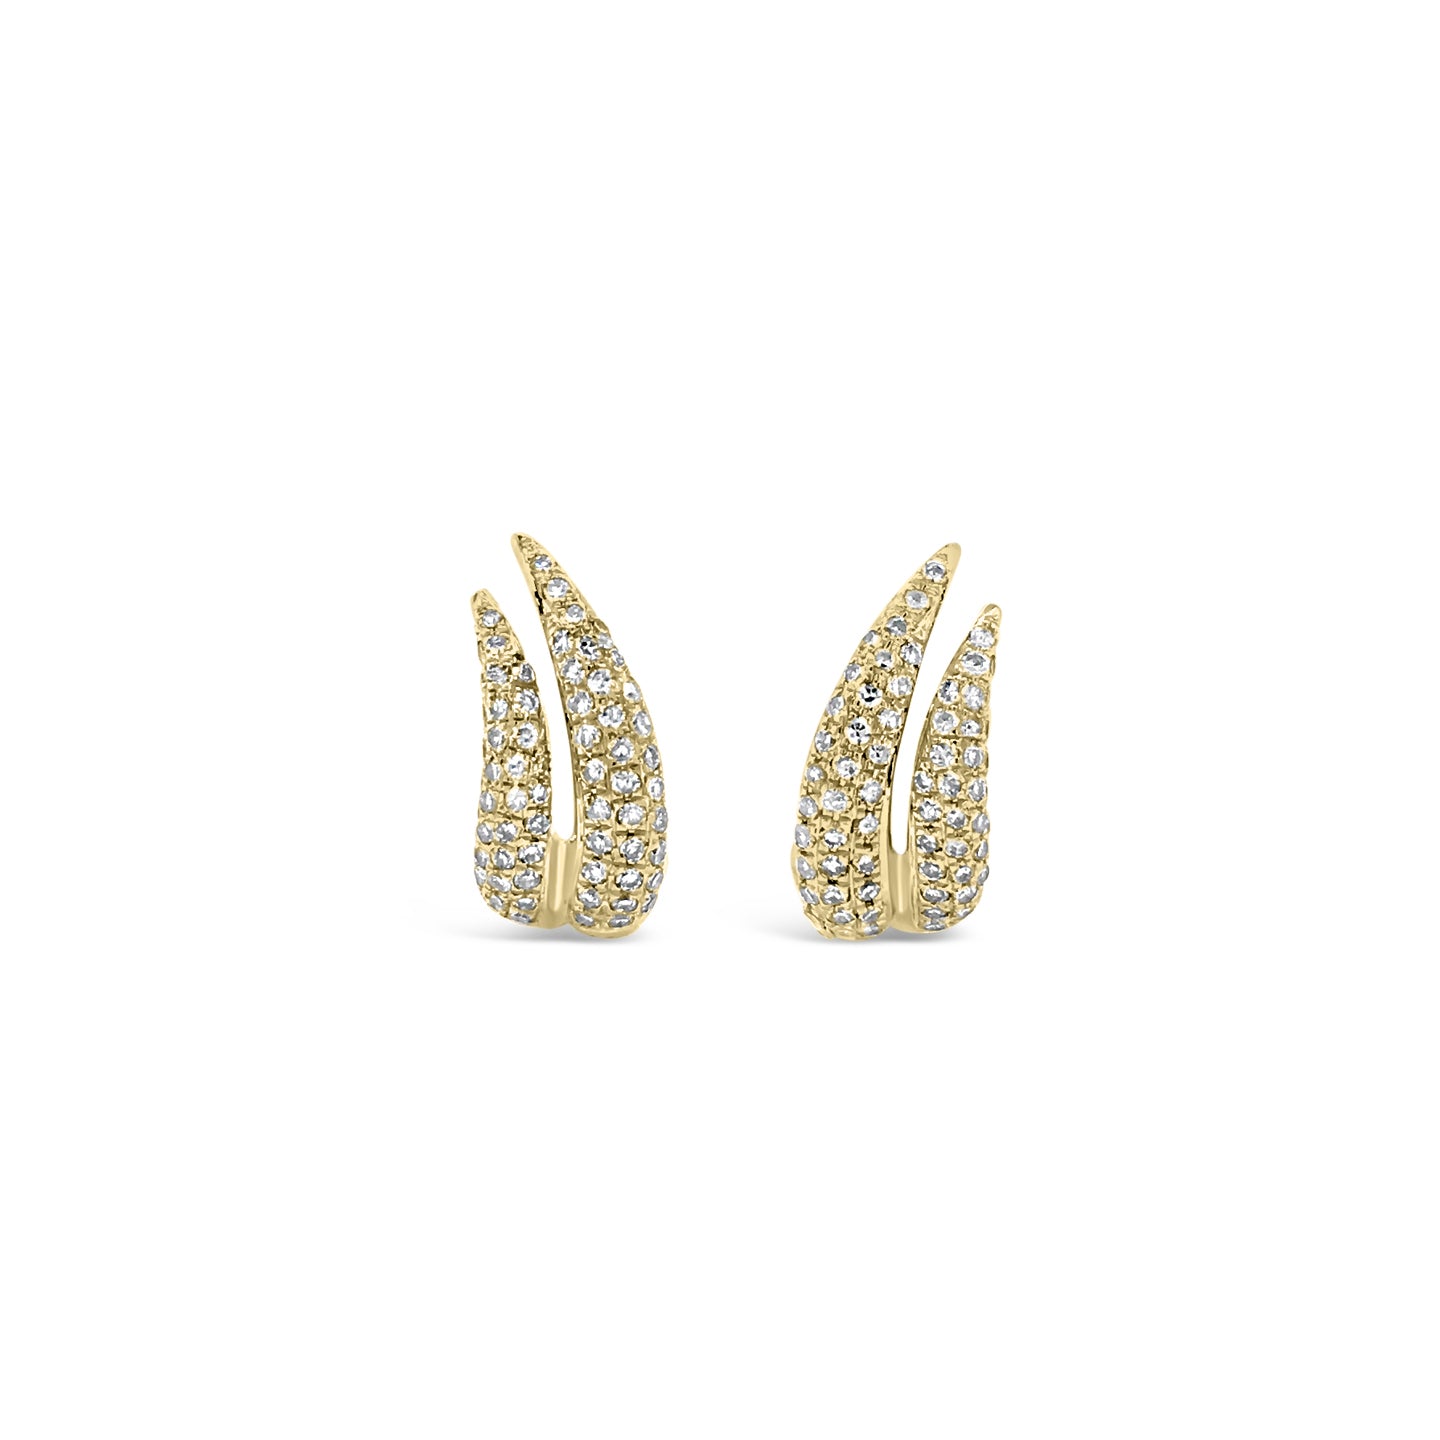 Diamond Claw Stud Earrings -14K white gold weighing 1.99 grams -138 round diamonds totaling 0.30 carats